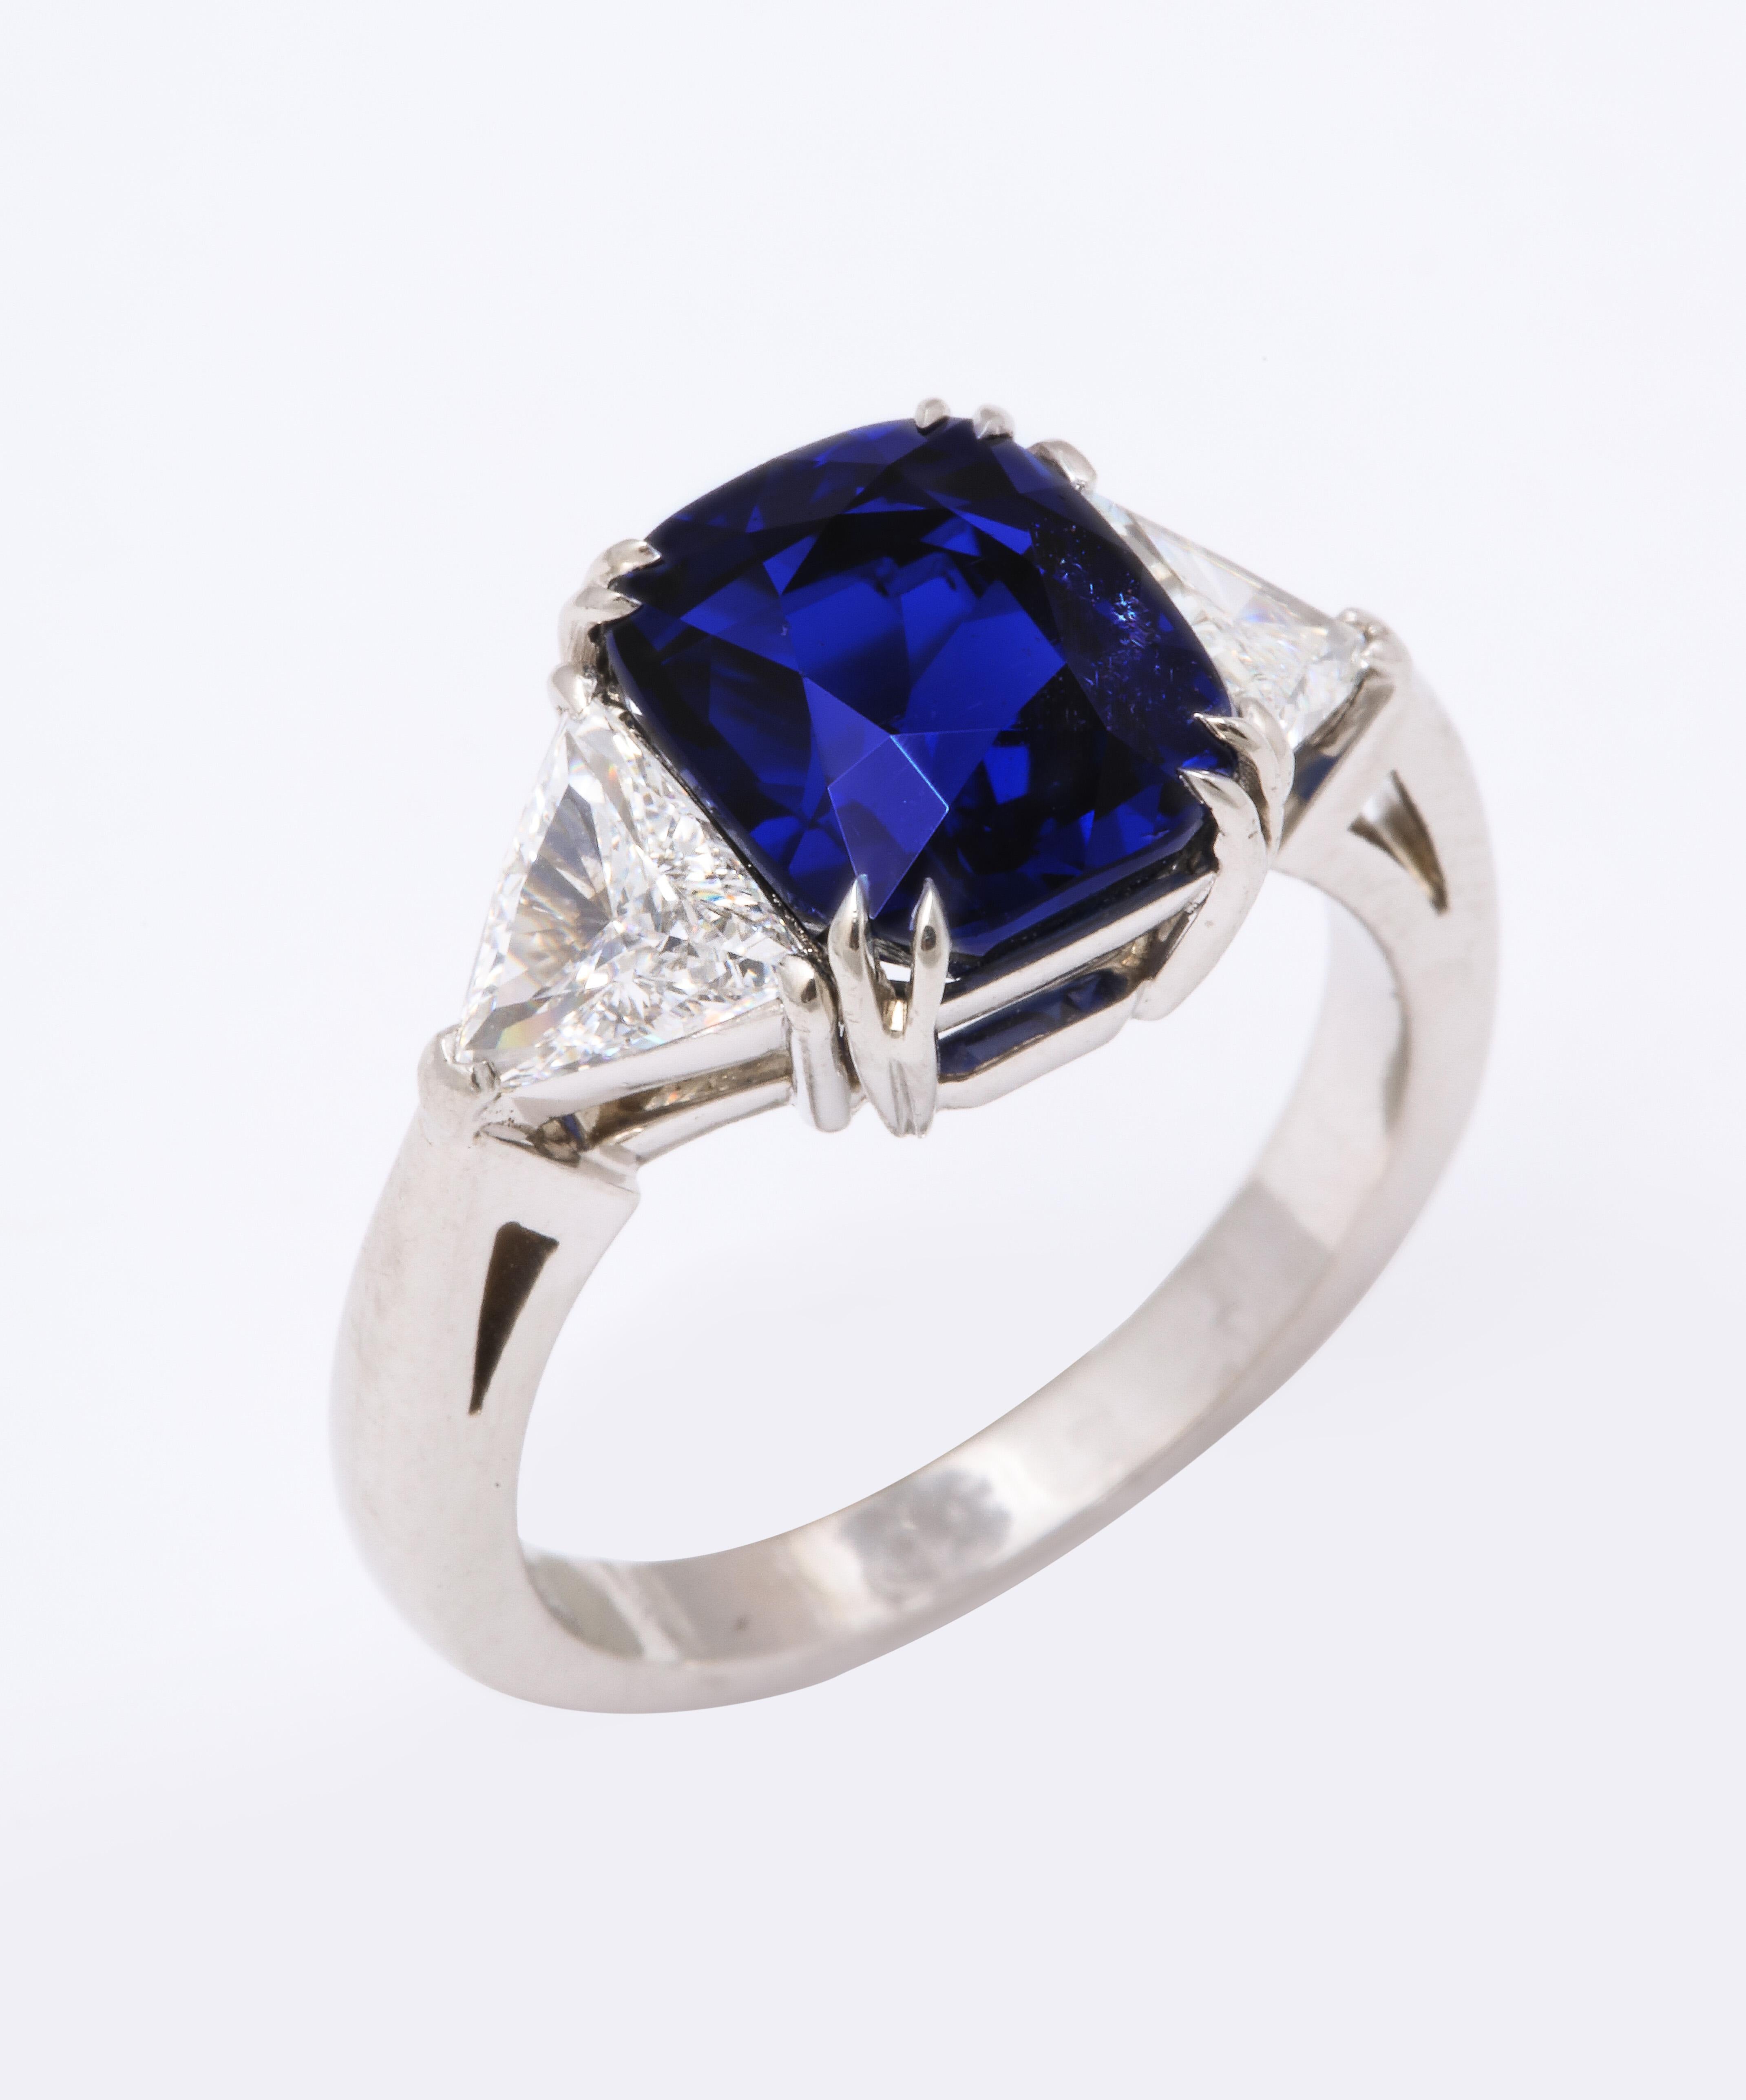 Burmese Cushion Cut Sapphire Trillion Cut Diamond Platinum Ring In Good Condition For Sale In New York, NY